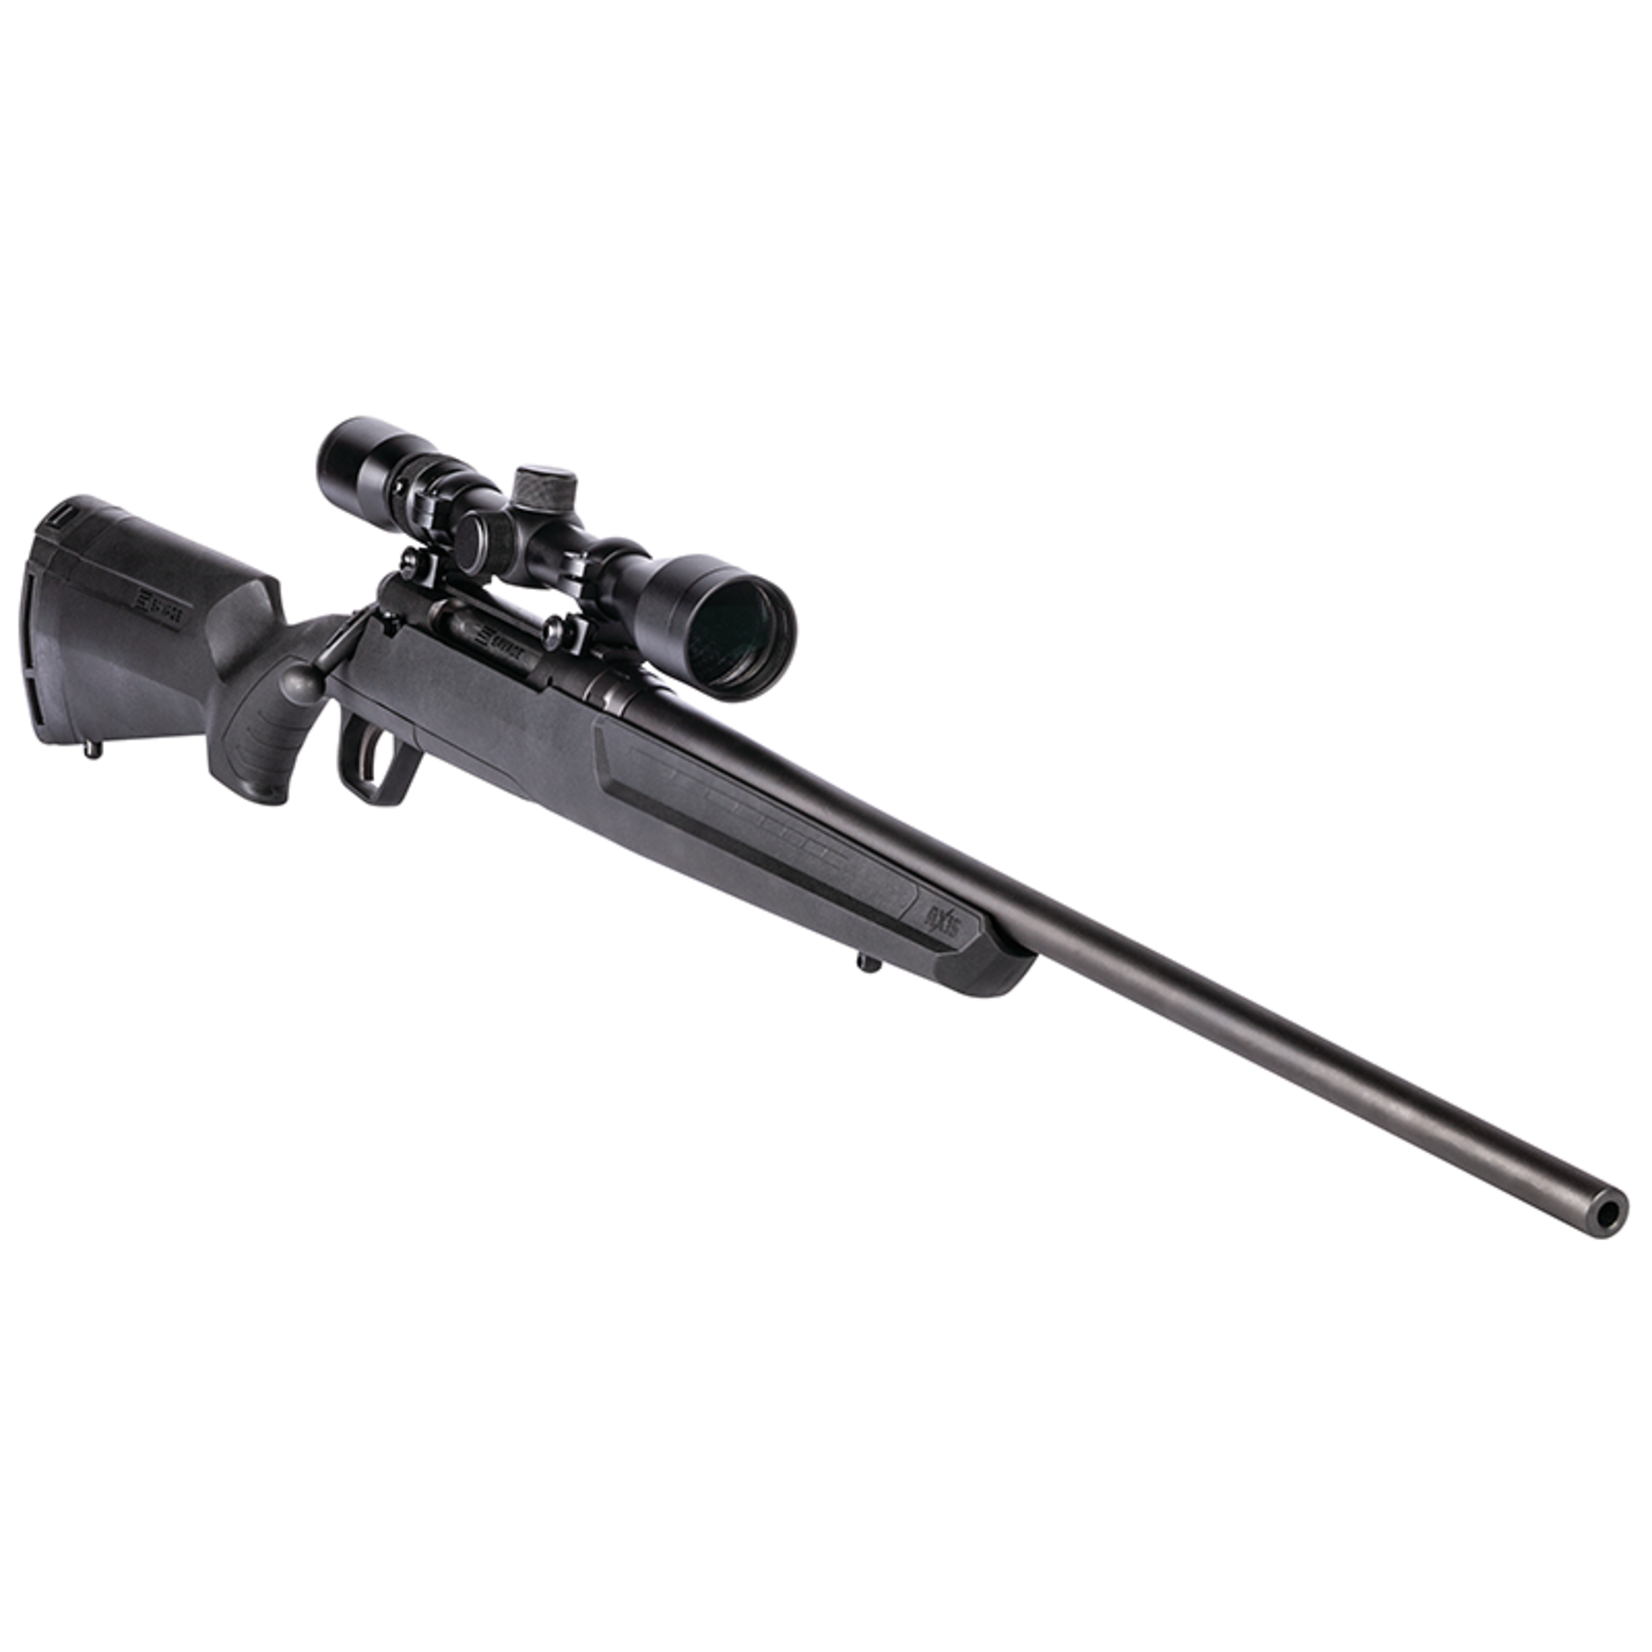 SAVAGE ARMS Carabine Savage Axis Synthétique Avec Télescope